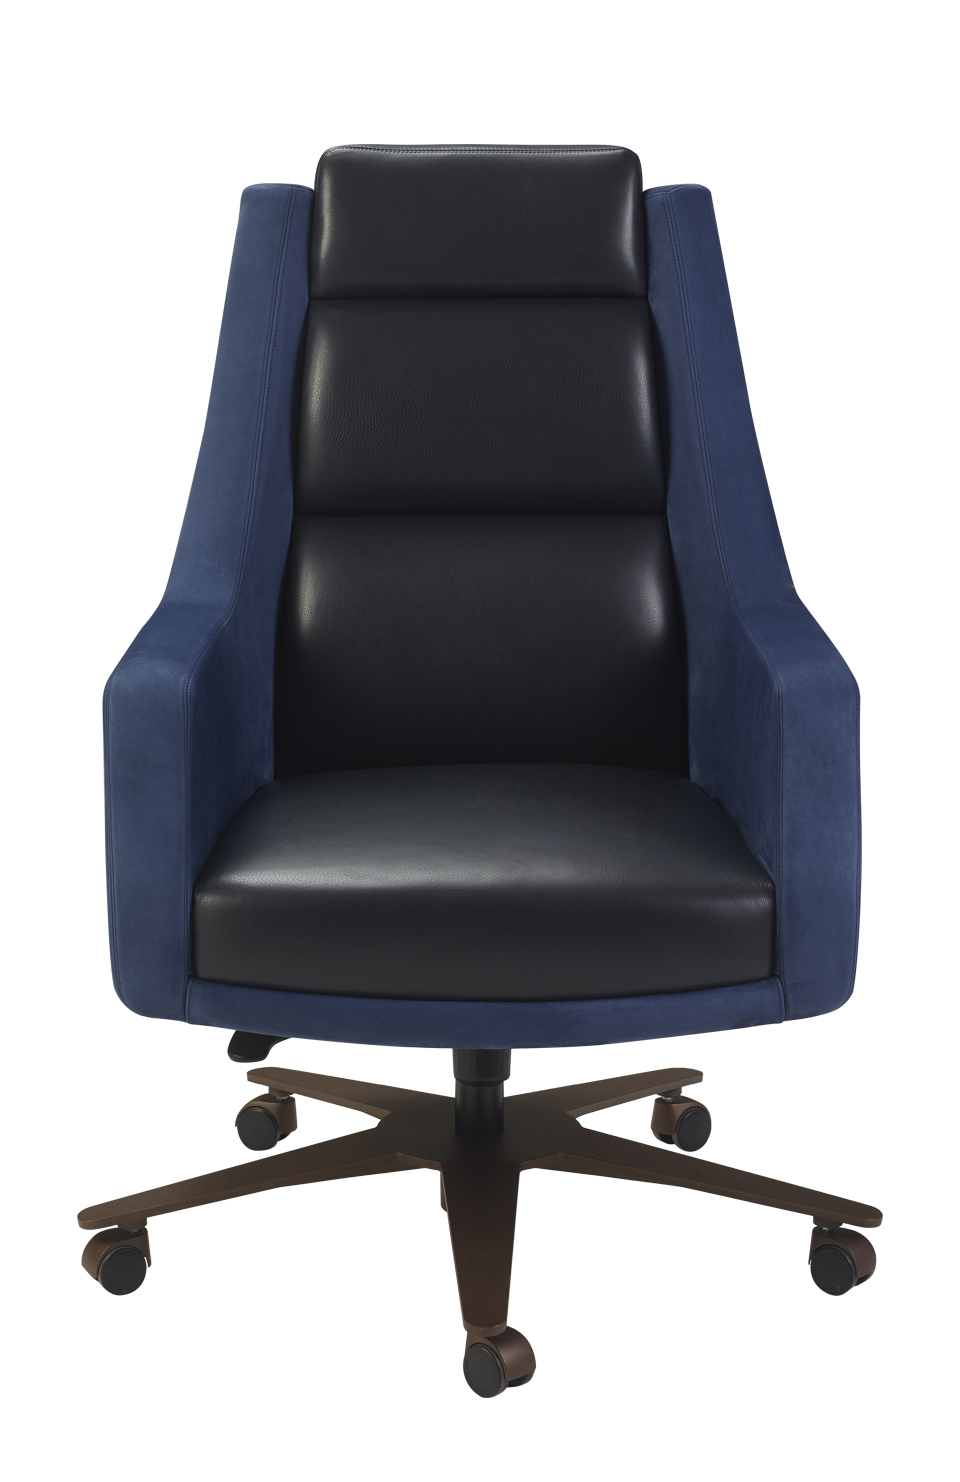 https://promemoria.freetls.fastly.net/mediaKate%20is%20an%20office%20chair%20with%20a%20metal%20base%20covered%20in%20leather%20and%20fabric,%20from%20Promemoria's%20Amaranthine%20Tales%20collection%20|%20Promemoria